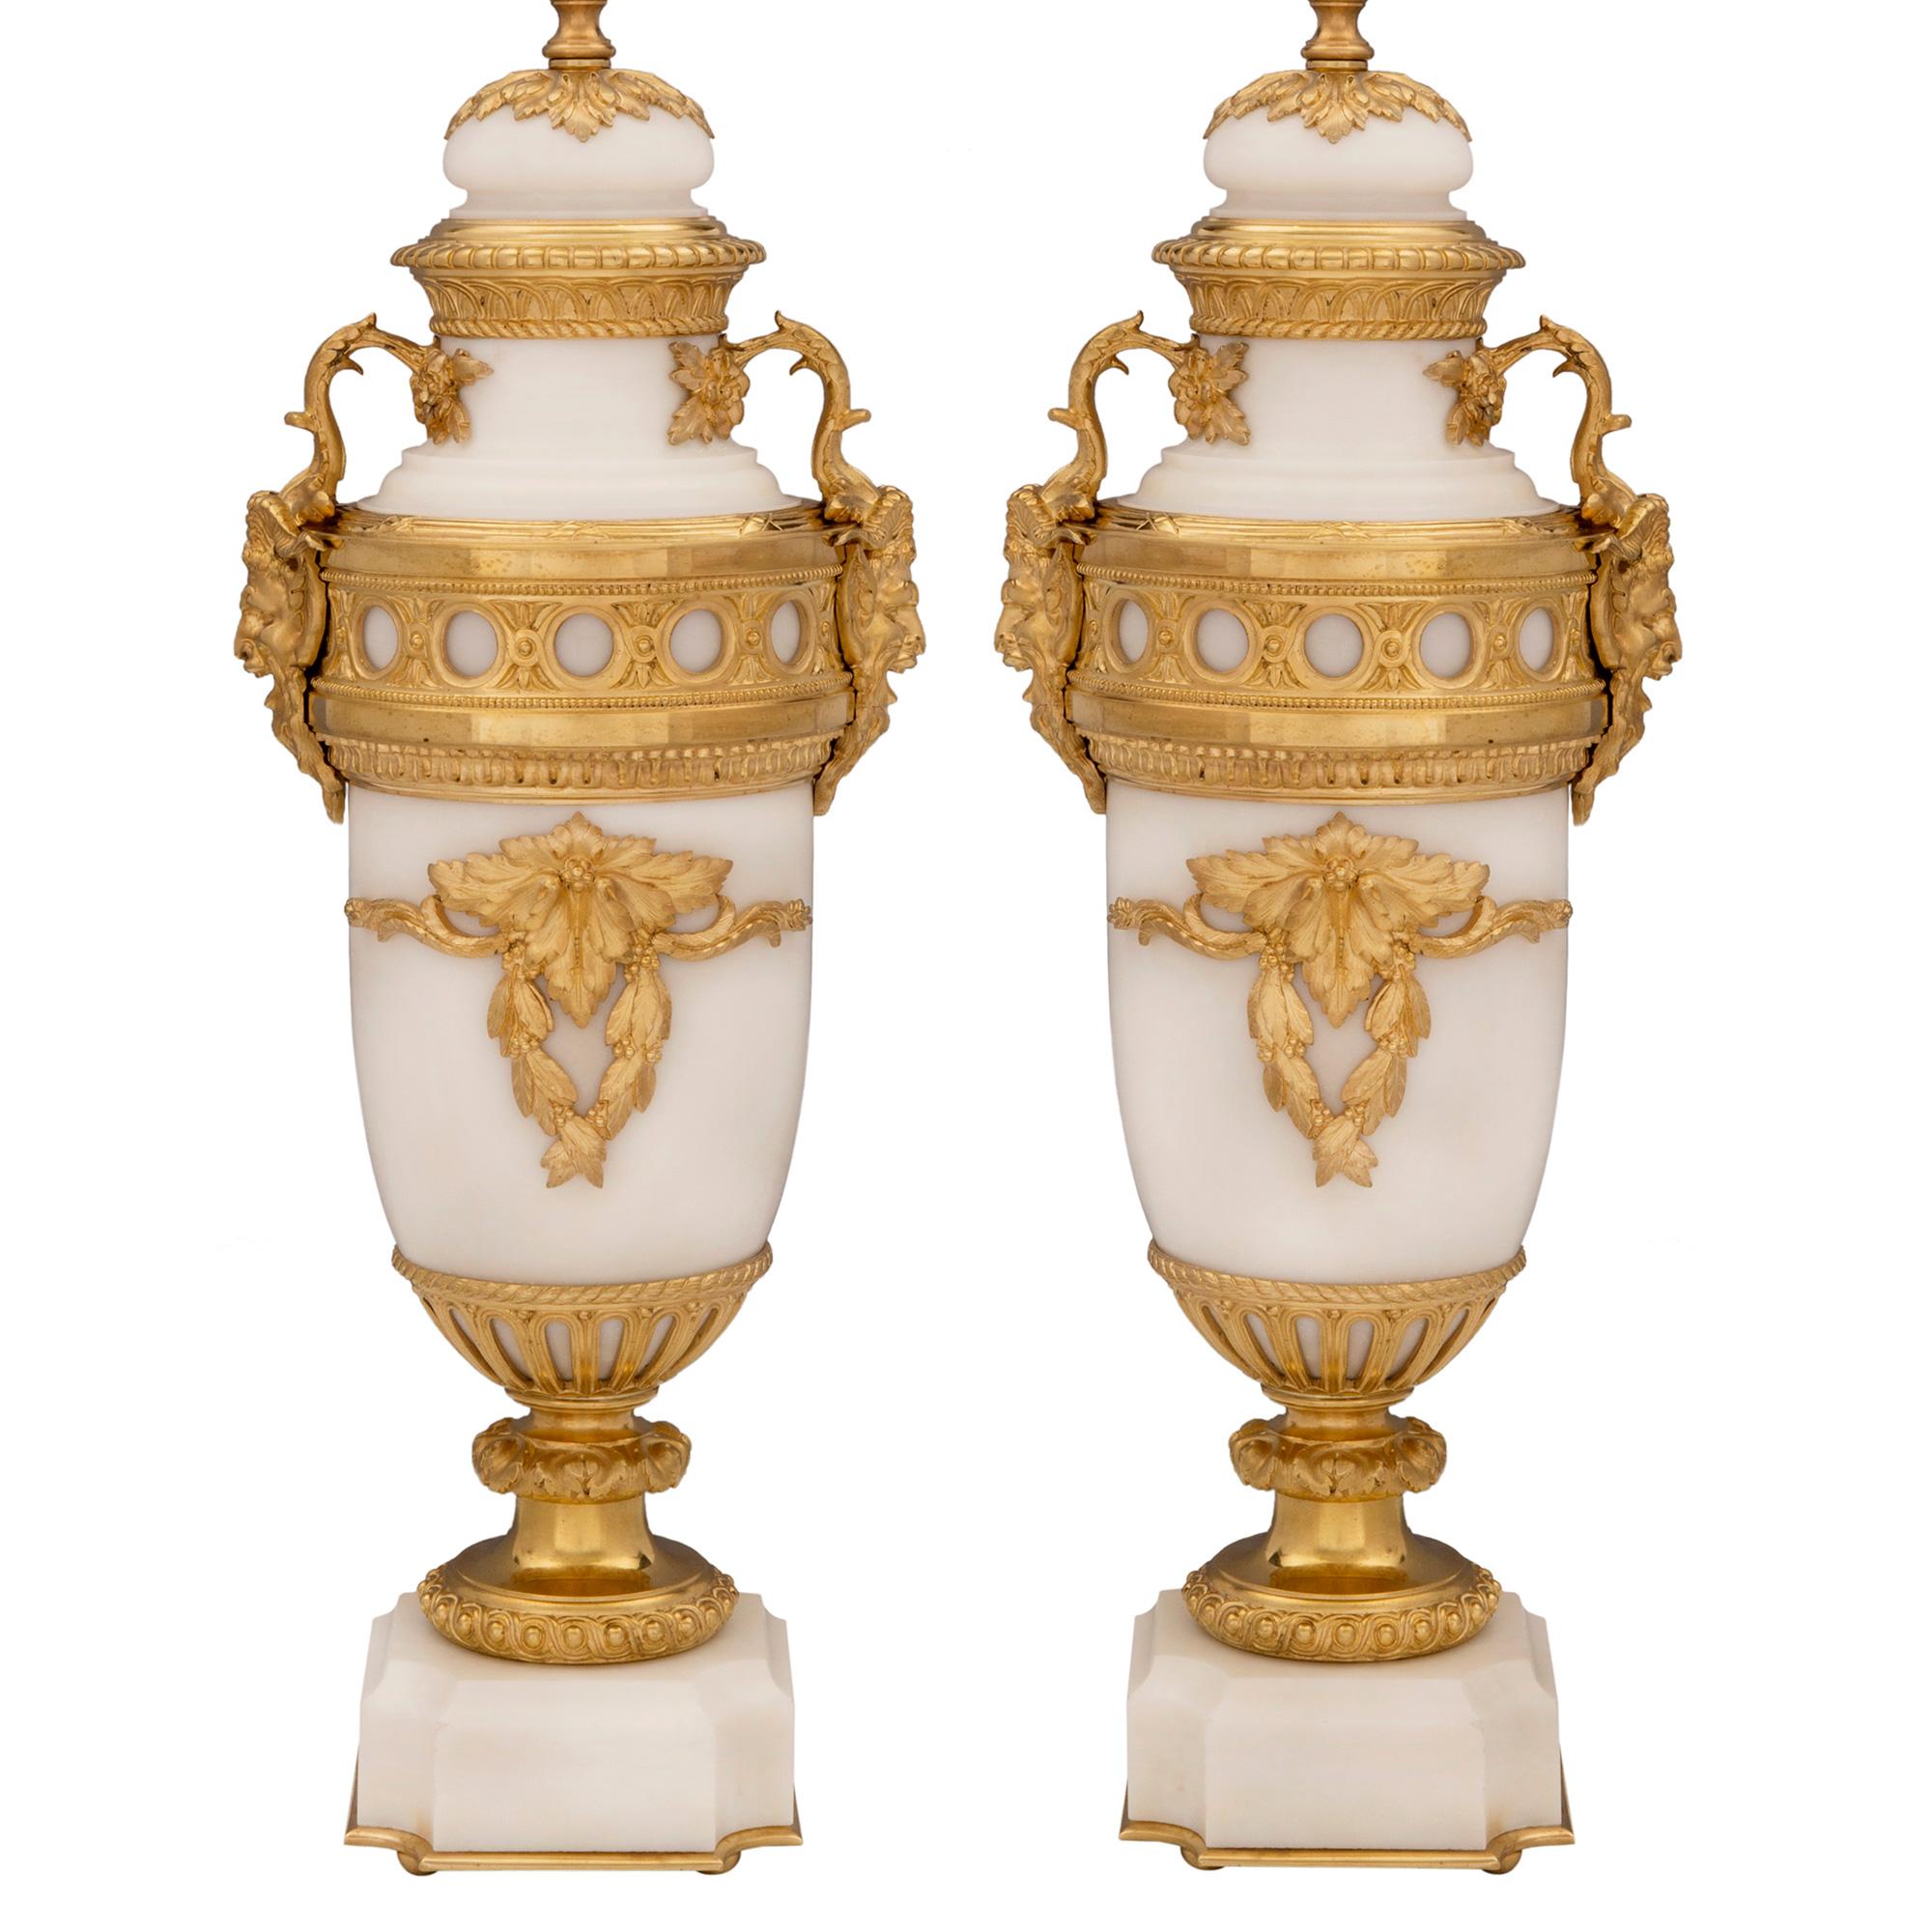 An extremely elegant pair of French 19th century Louis XVI st. white Carrara marble and ormolu lamps. Each lamp is raised by fine discreet ball feet below a square white Carrara marble base with a mottled top. concave corners and a decorative ormolu